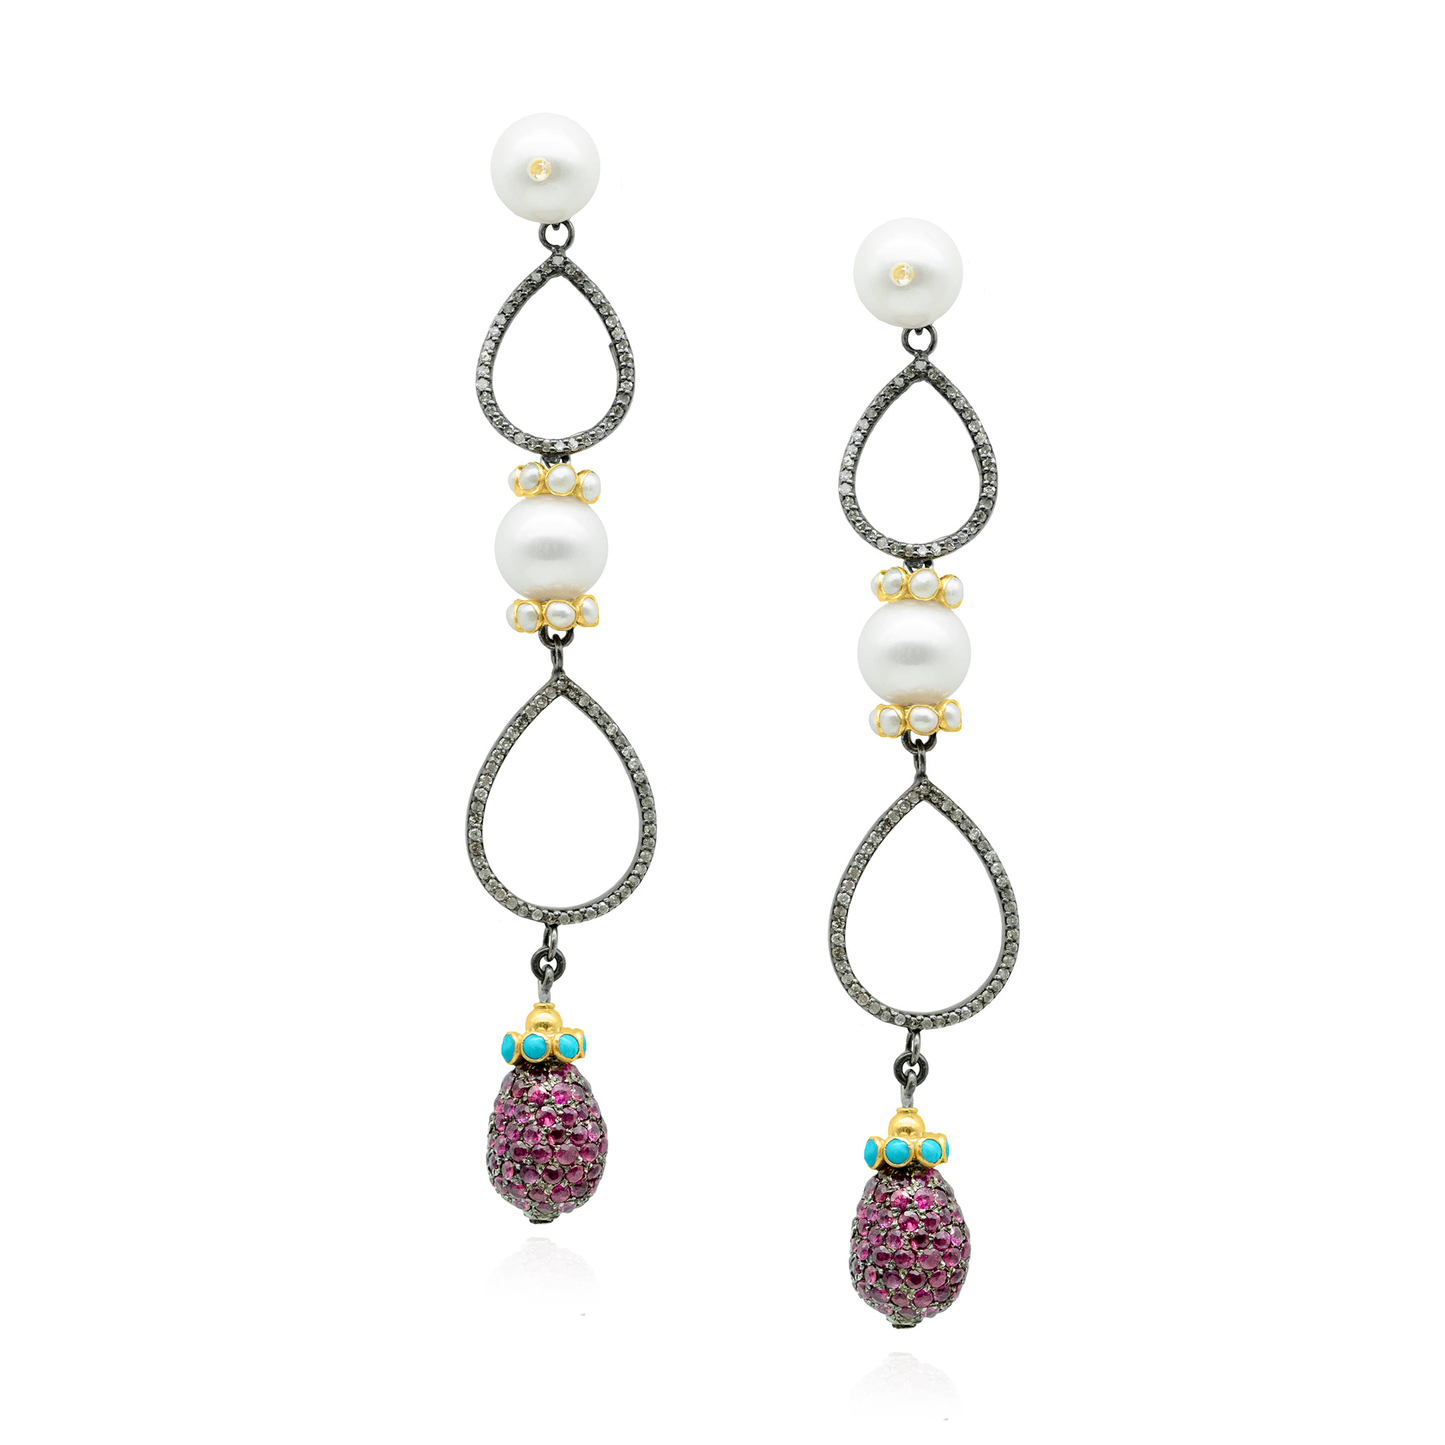 925 Silver Earrings with Freshwater Pearls & Precious Stones